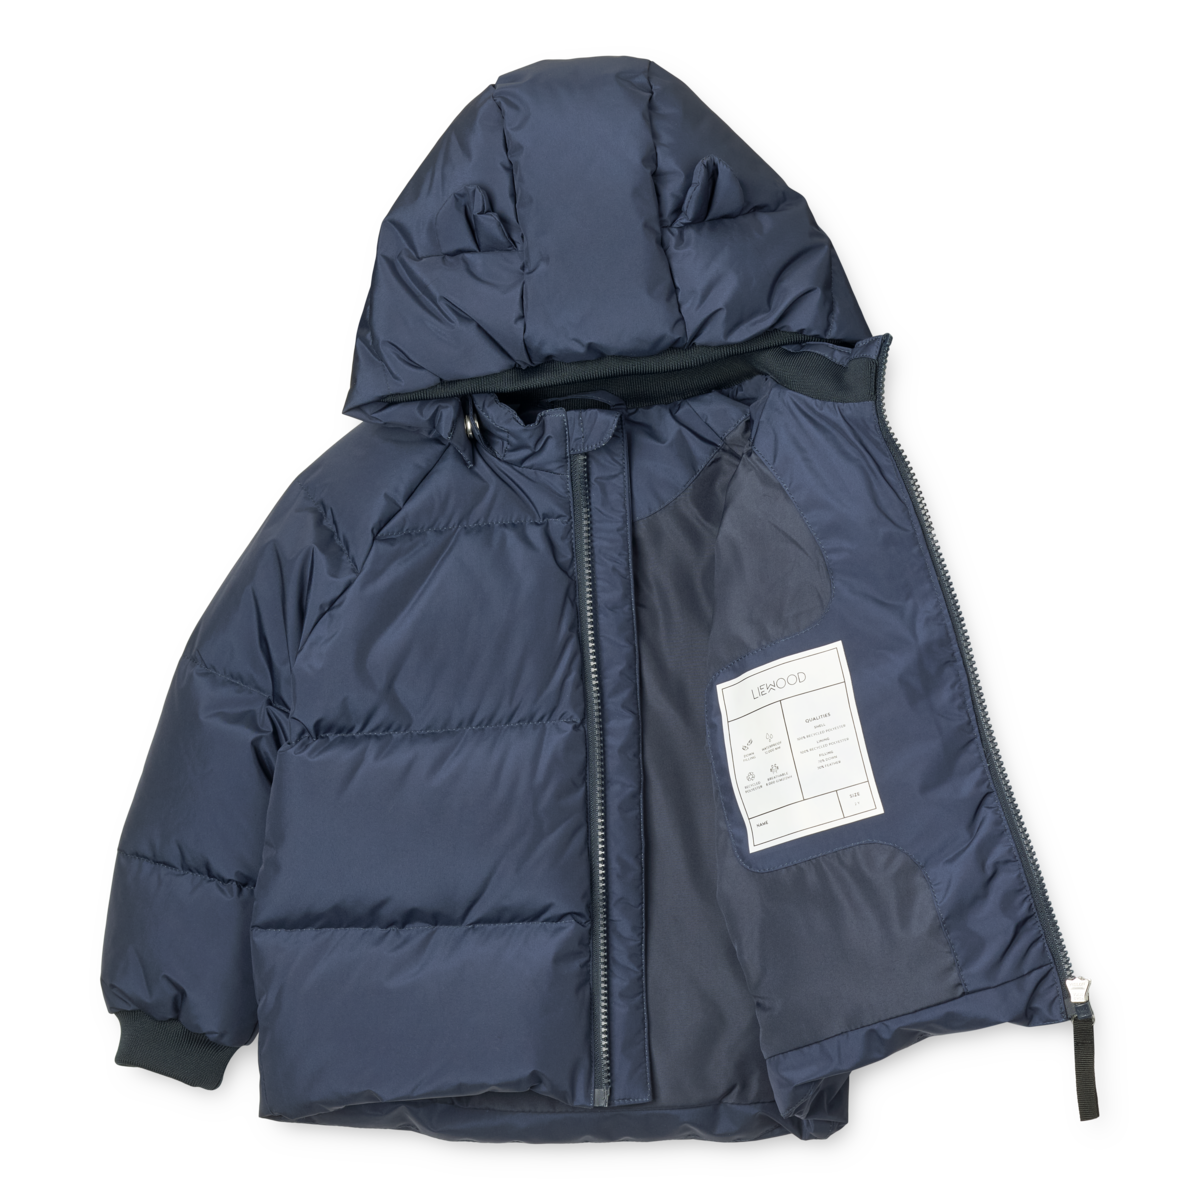 Liewood Polle Puffer Jacket | Classic Navy*